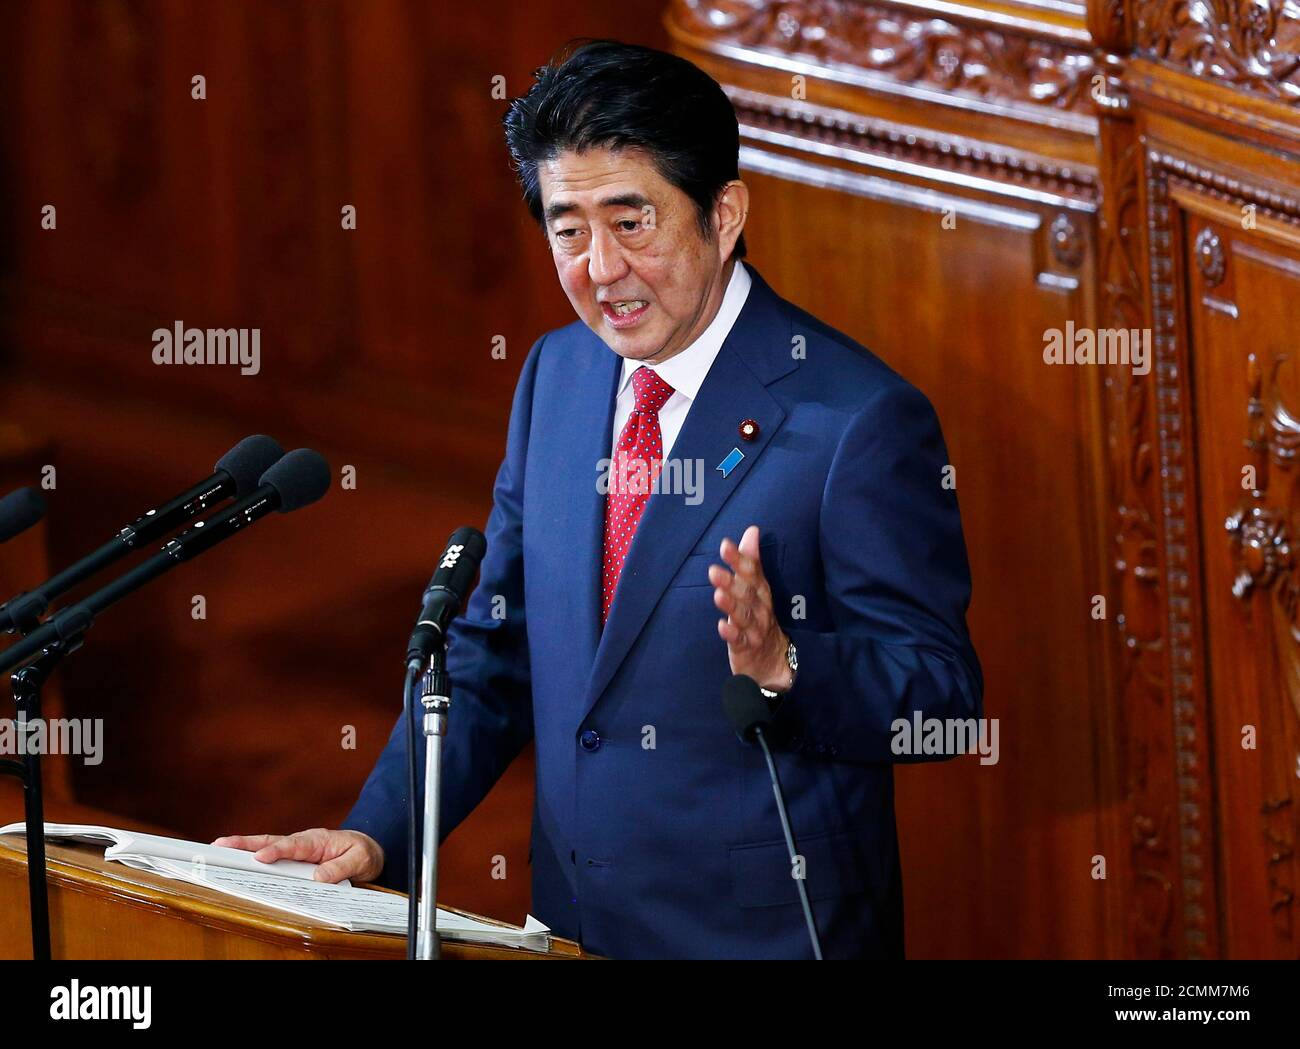 Japan's Prime Minister Shinzo Abe delivers his policy speech at the lower house of parliament in Tokyo February 12, 2015. Abe and his economic ministers piled pressure on companies on Thursday to raise wages to sustain growth as the economy climbs out of a recession triggered by a sales tax increase last year. REUTERS/Thomas Peter (JAPAN - Tags: POLITICS BUSINESS) Stock Photo